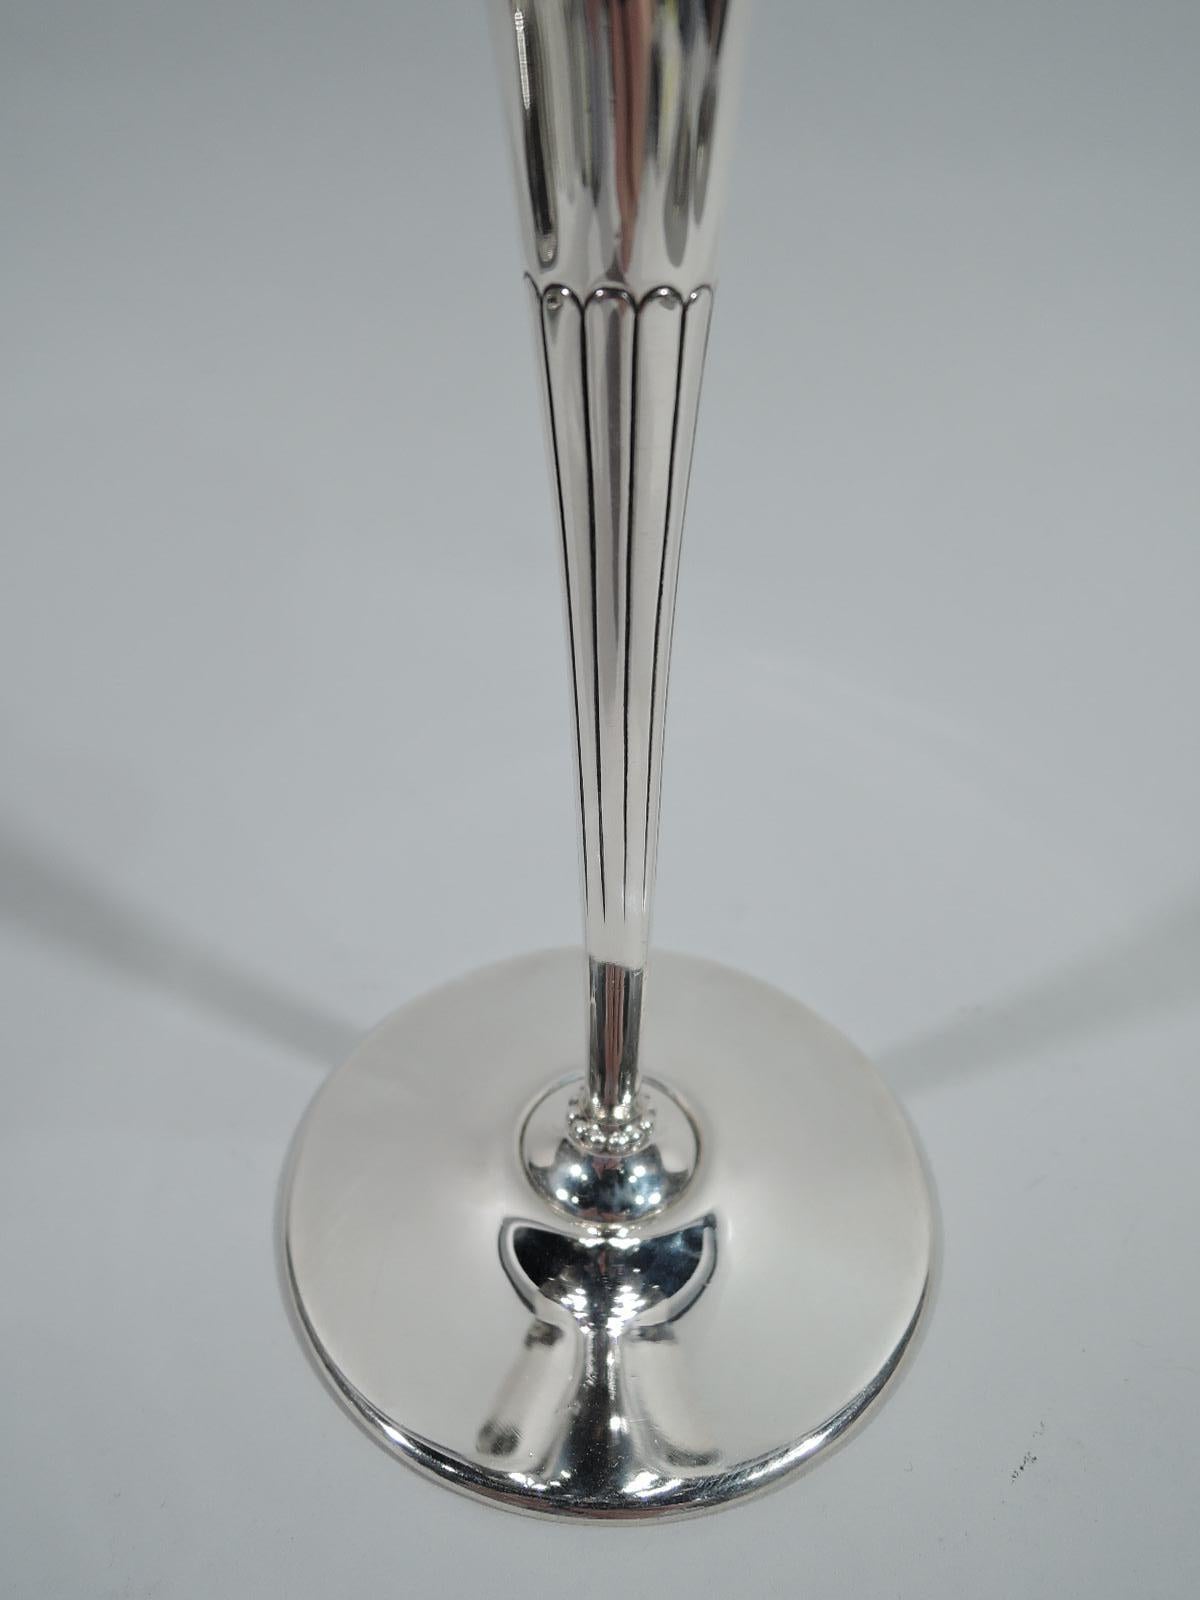 North American Antique American Edwardian Sterling Silver Fluted Cone Vase by Tiffany